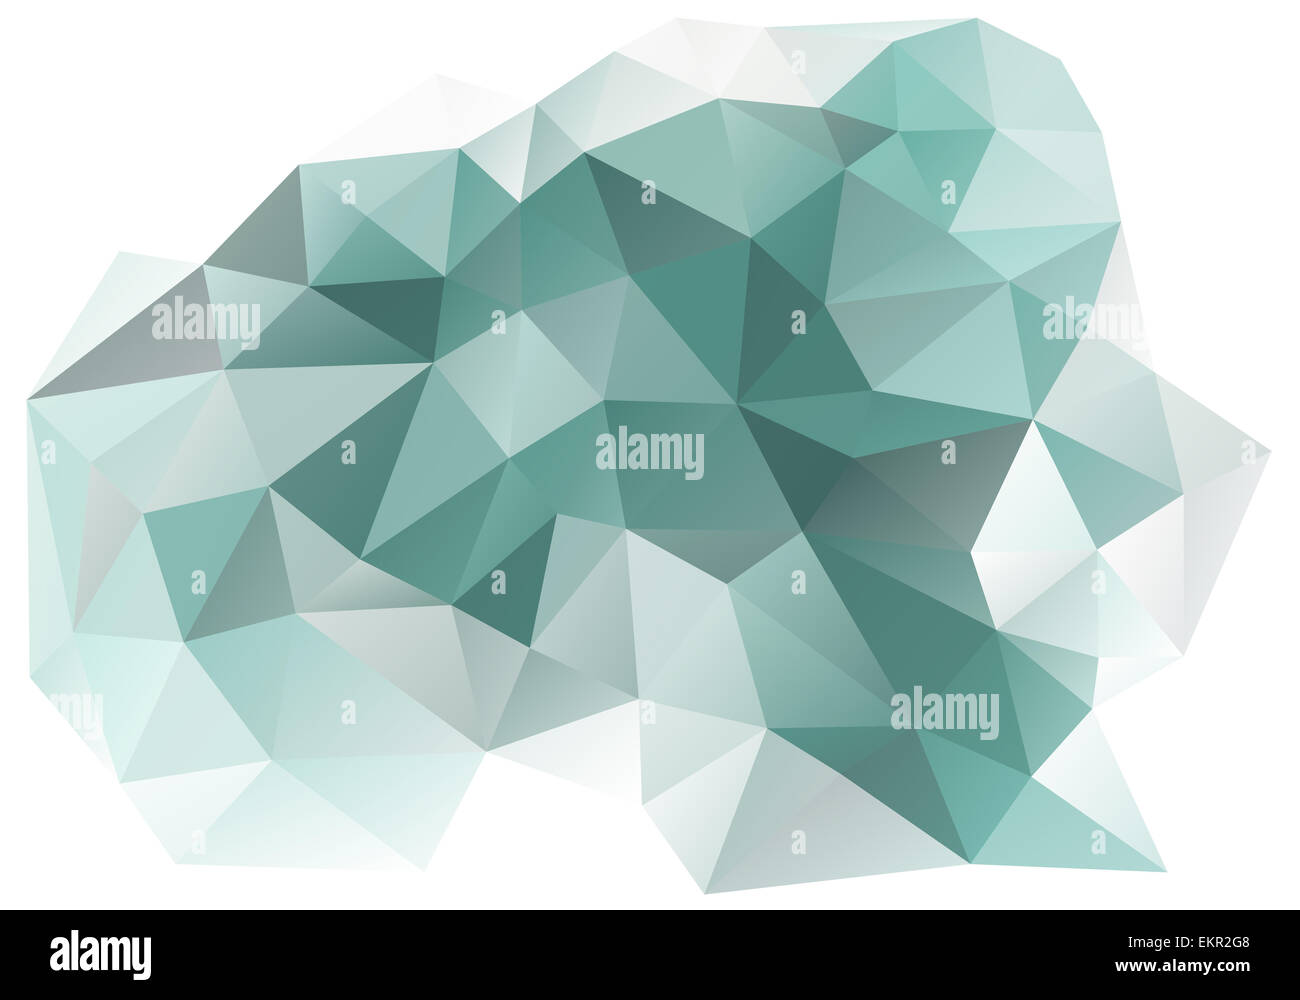 abstract teal and gray low poly background, vector design element Stock Photo